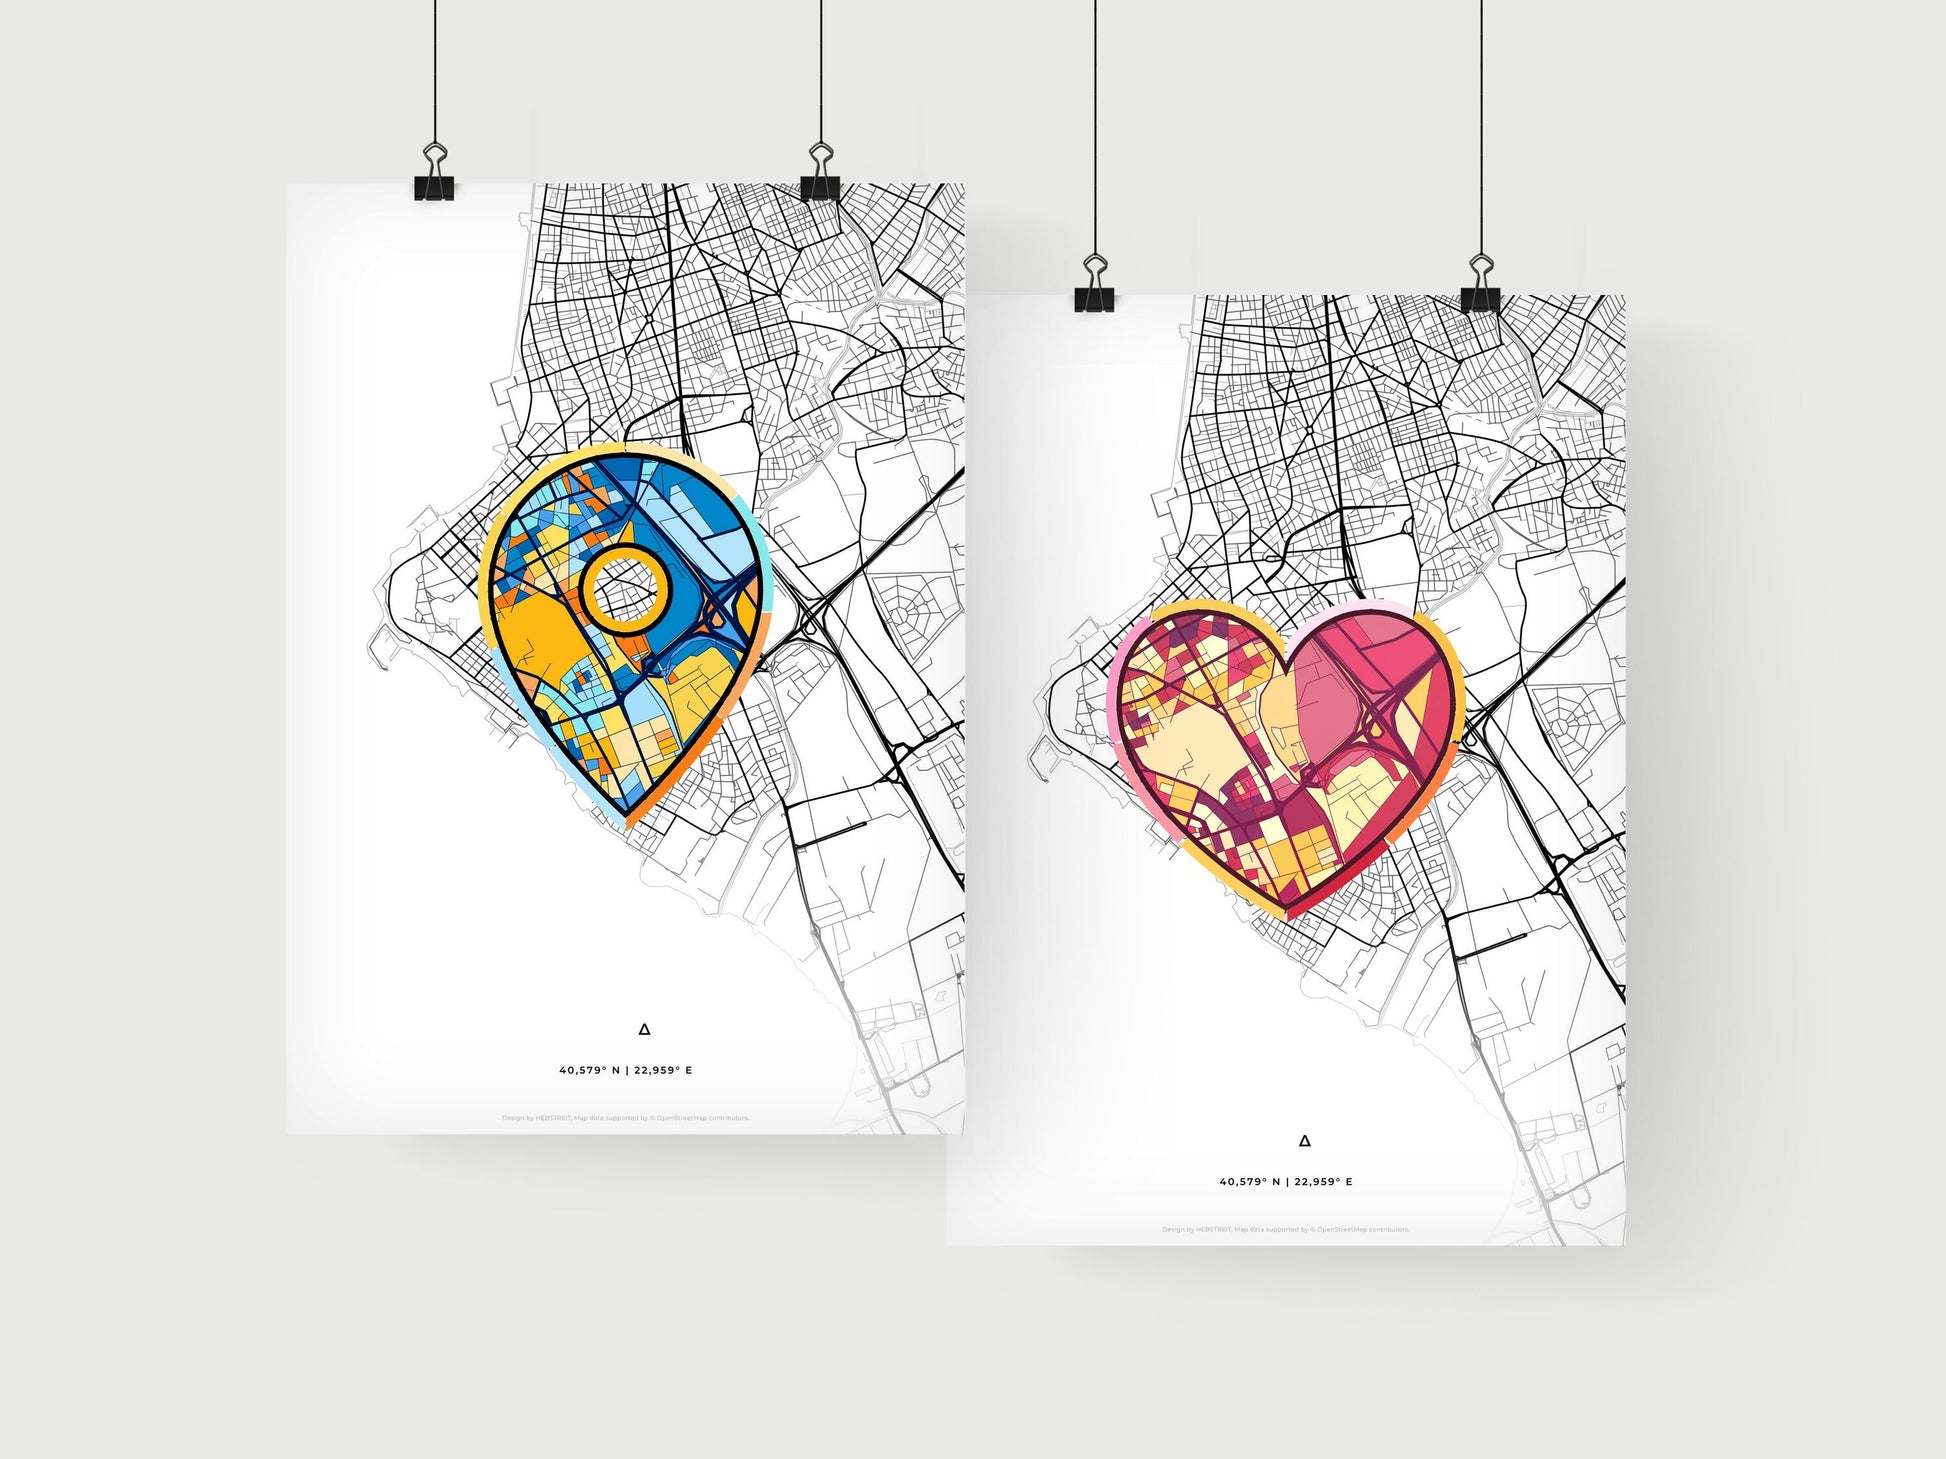 KALAMARIA GREECE minimal art map with a colorful icon. Where it all began, Couple map gift.